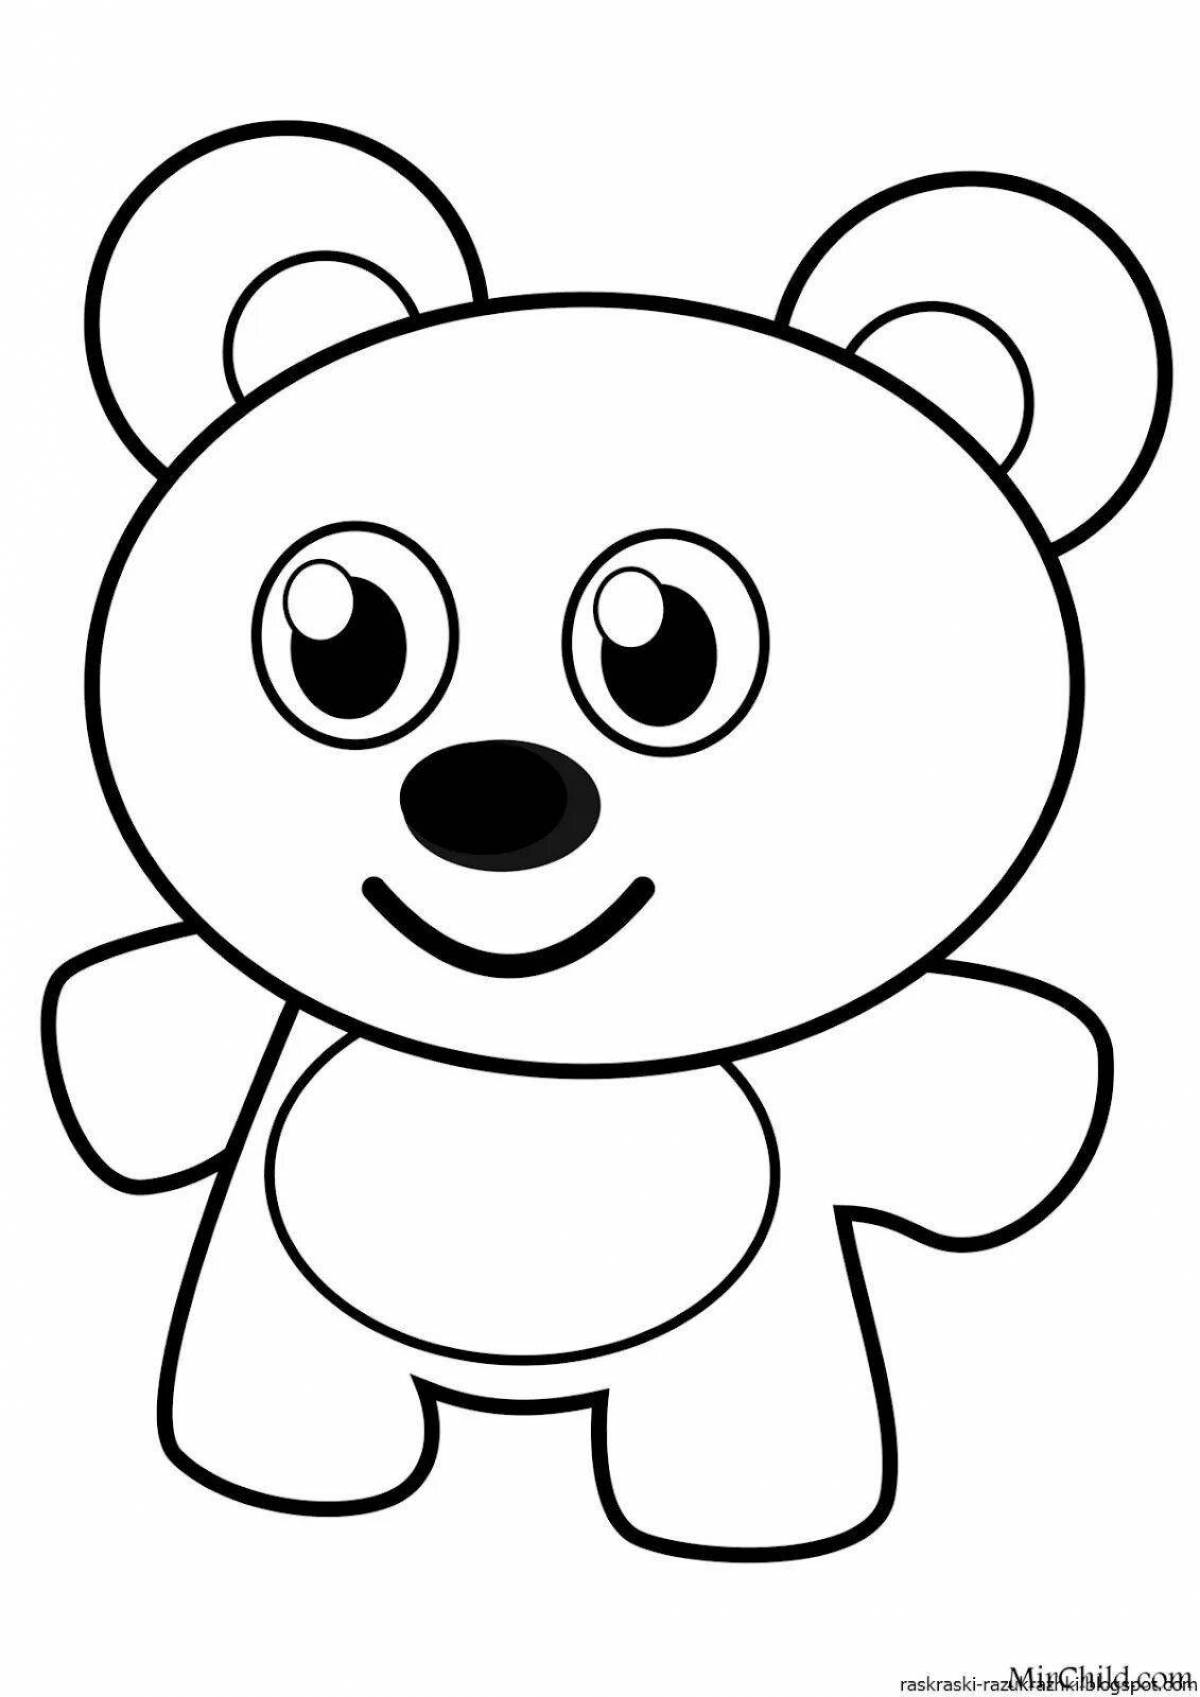 Color-happy coloring page large for 4-5 year olds